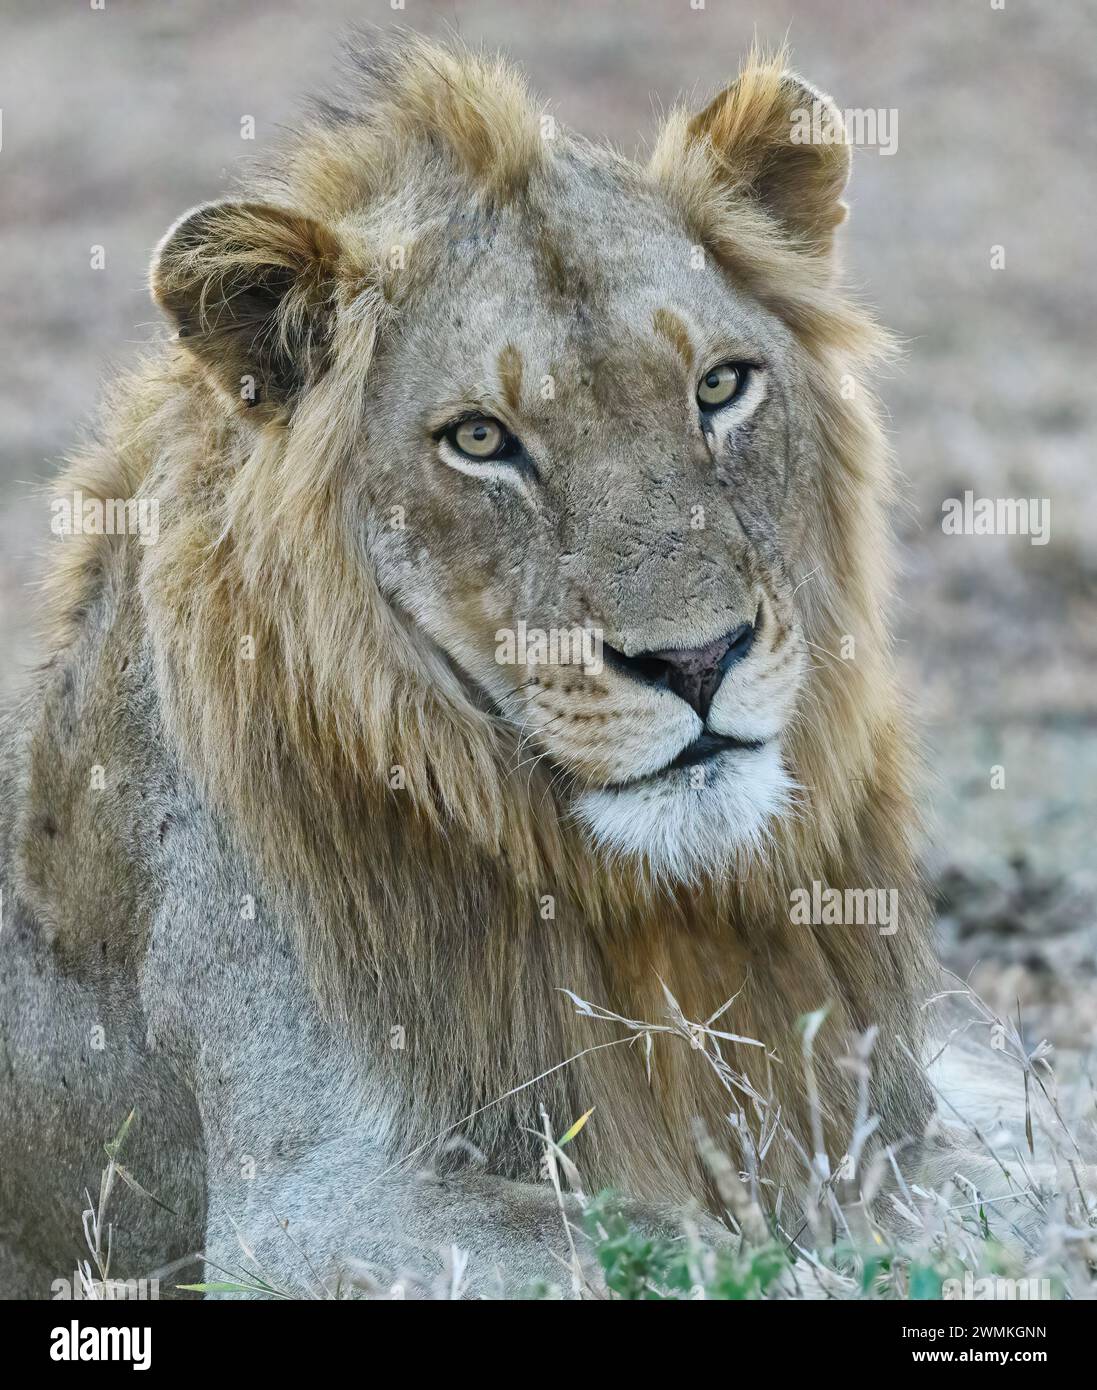 Portrait of a Male Lion looking directly at viewer Stock Photo